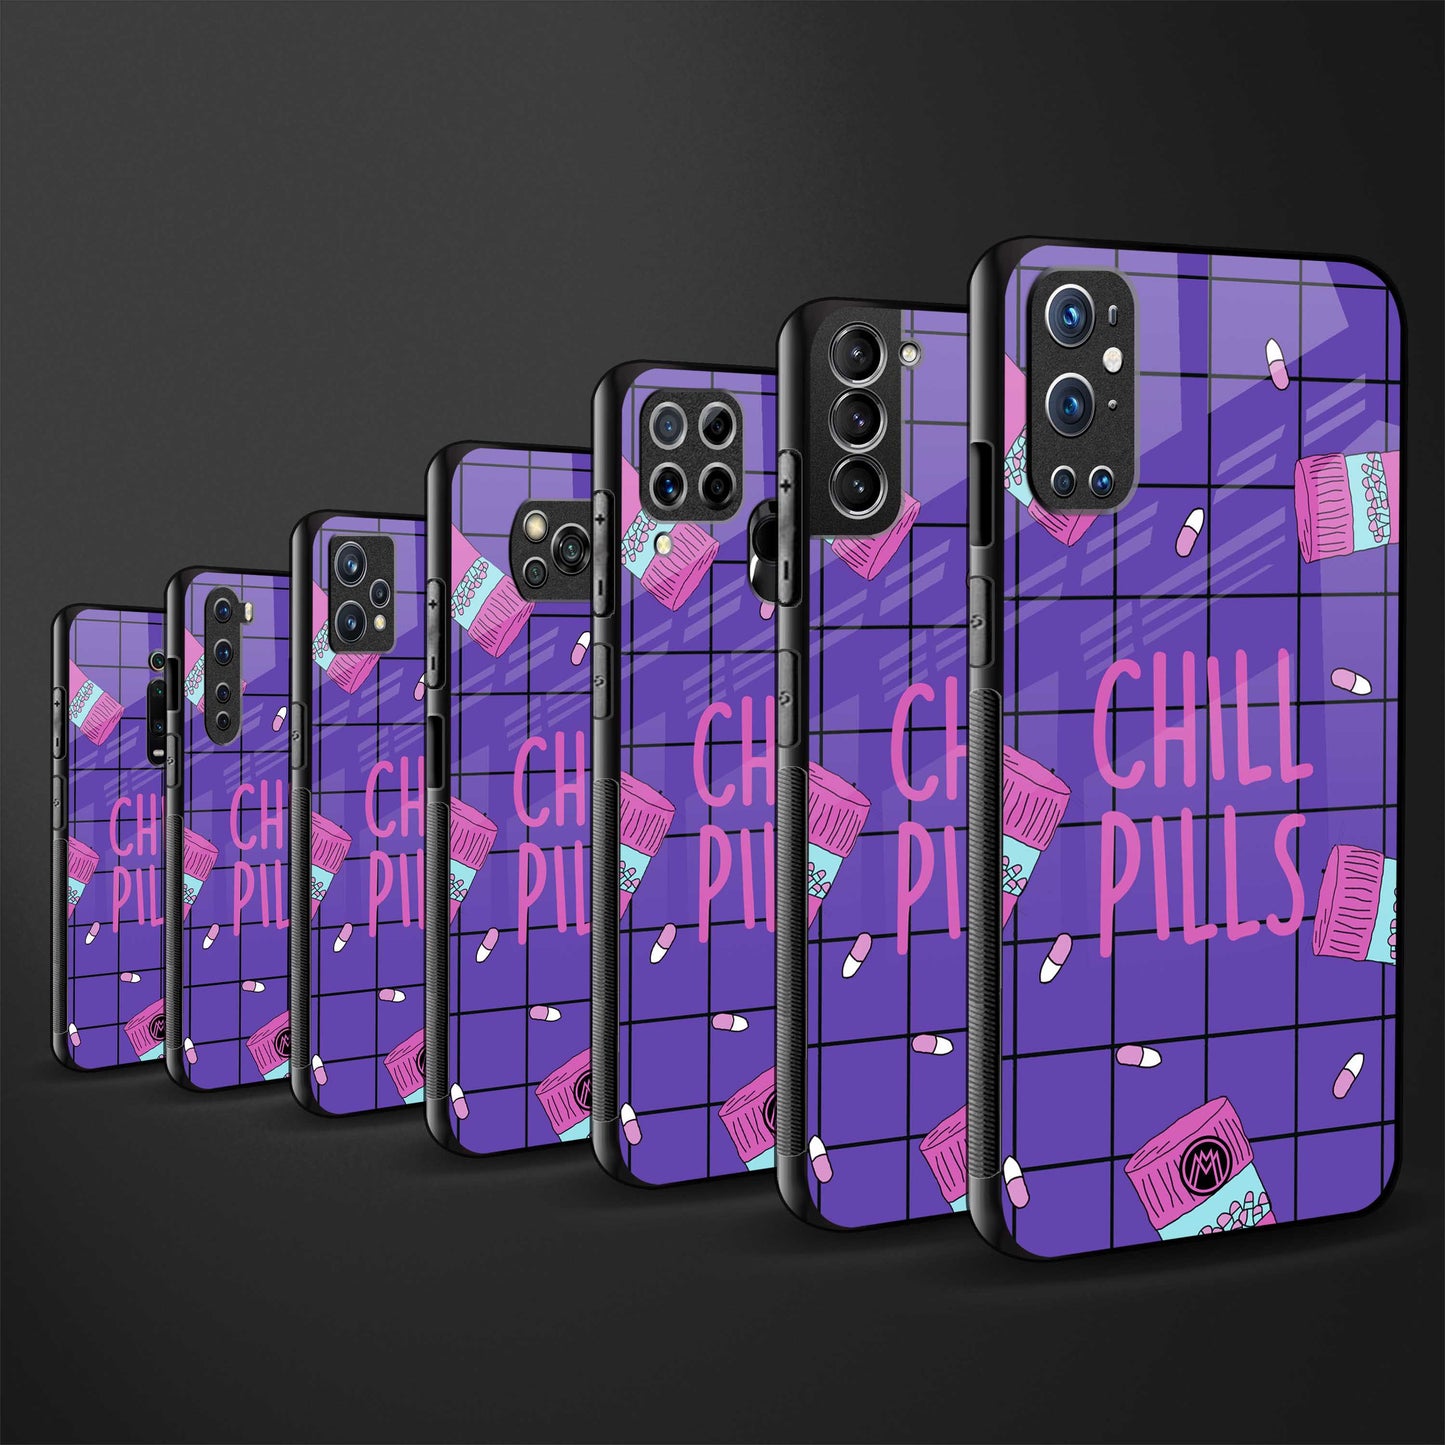 chill pills glass case for iphone xs max image-3